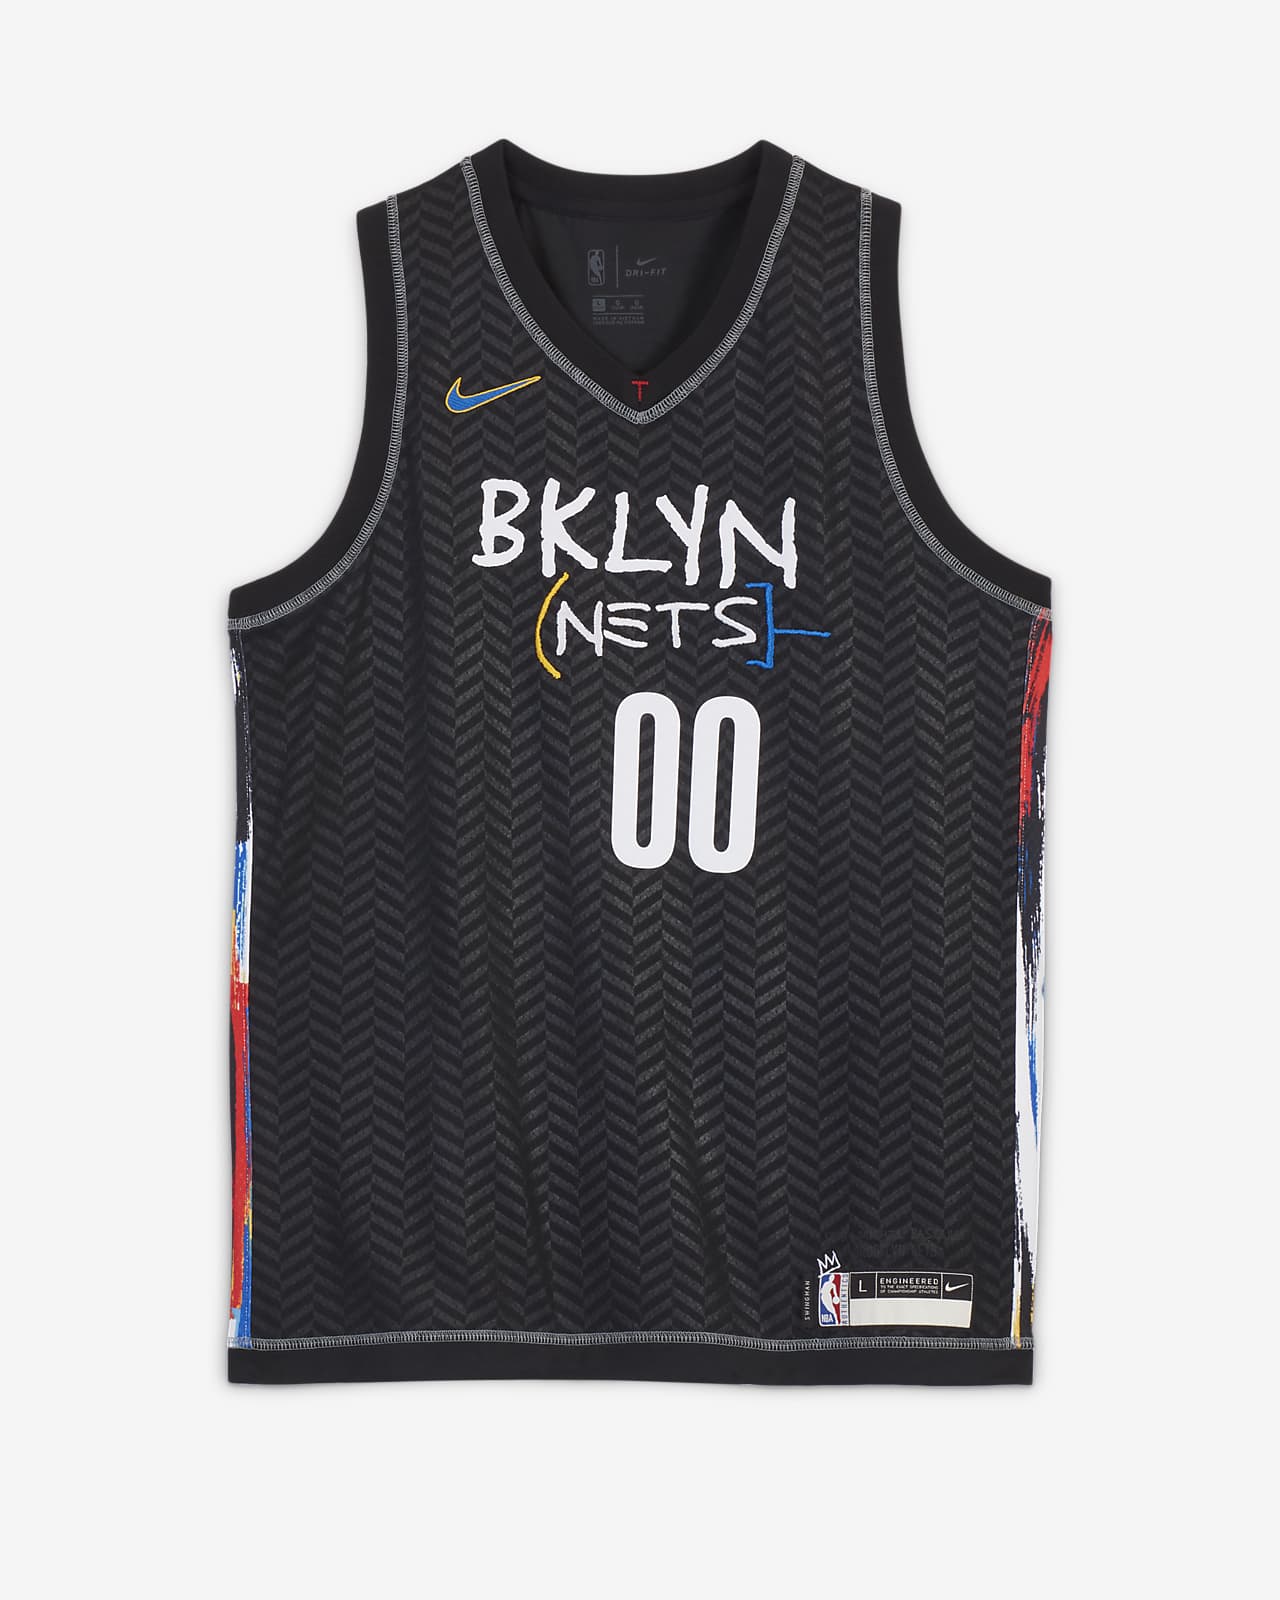 kyrie irving nets city edition jersey